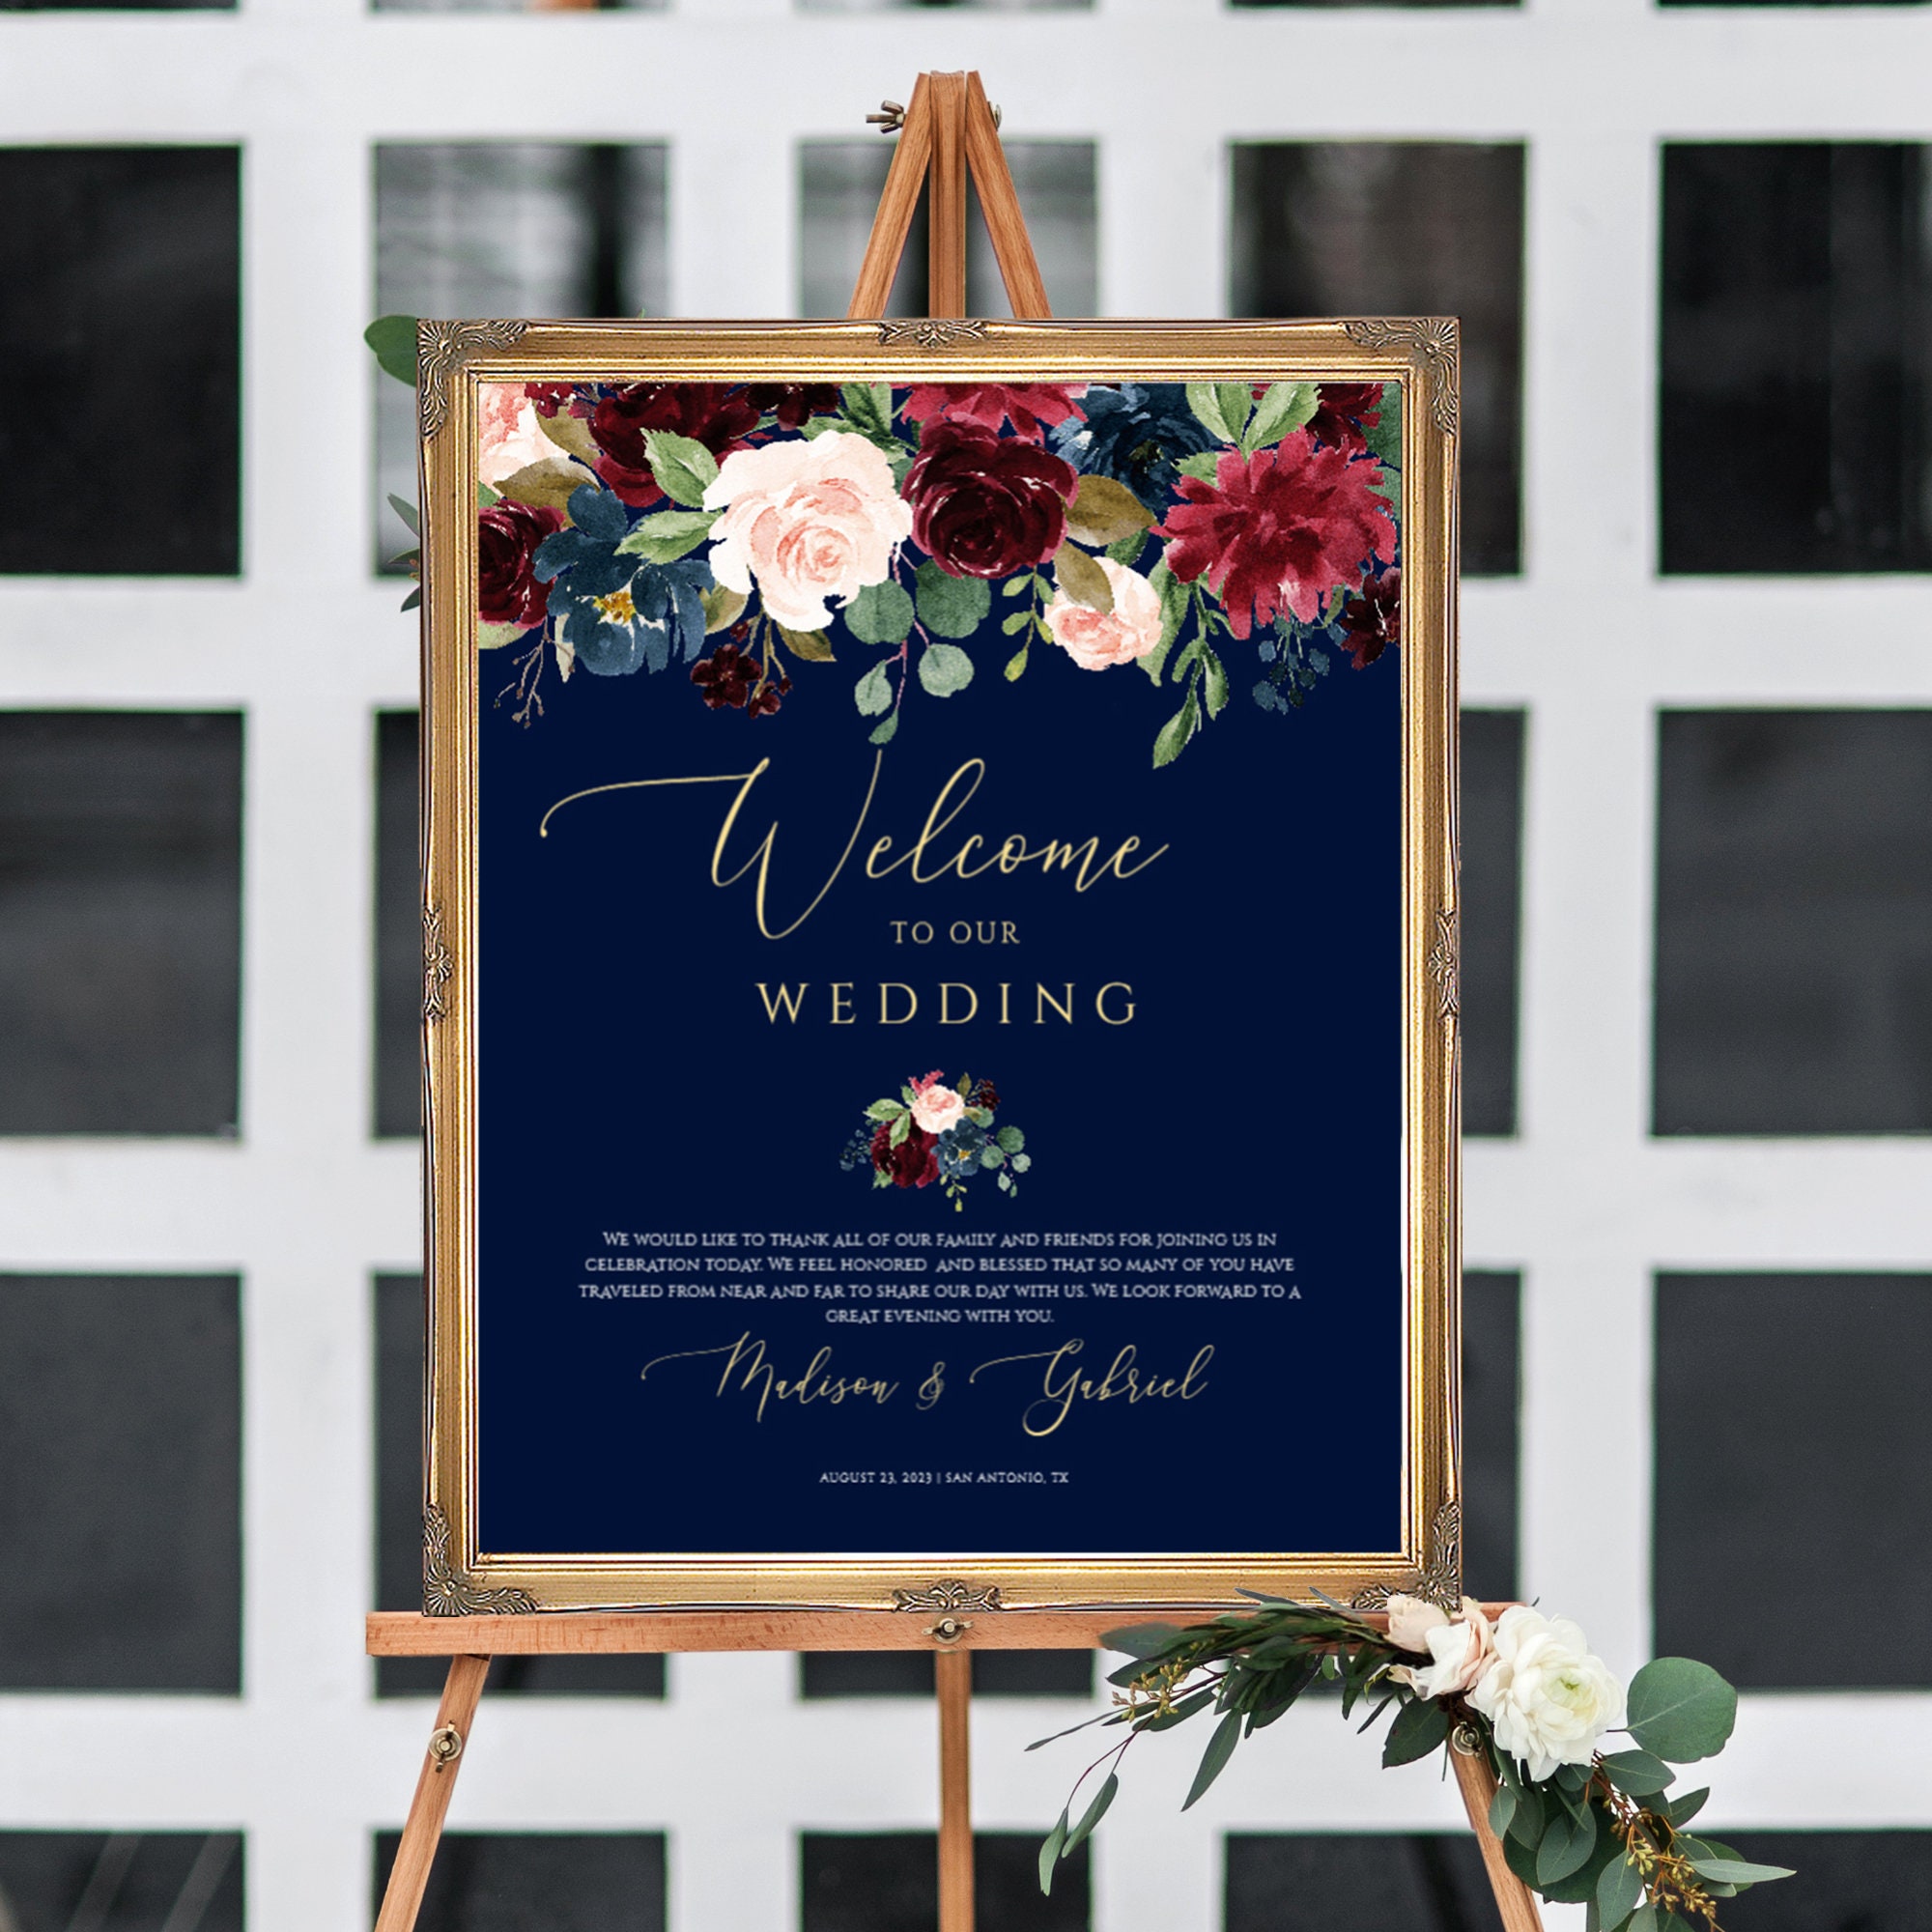  Burgundy and Navy Wedding Welcome Sign Printable, Editable  Wedding Sign Burgundy and Navy Blush Flowers Decor, Rustic Welcome Wedding  Sign Stand, Personalized Welcome Sign for Wedding, Wedding Decor, Plastic  Sign